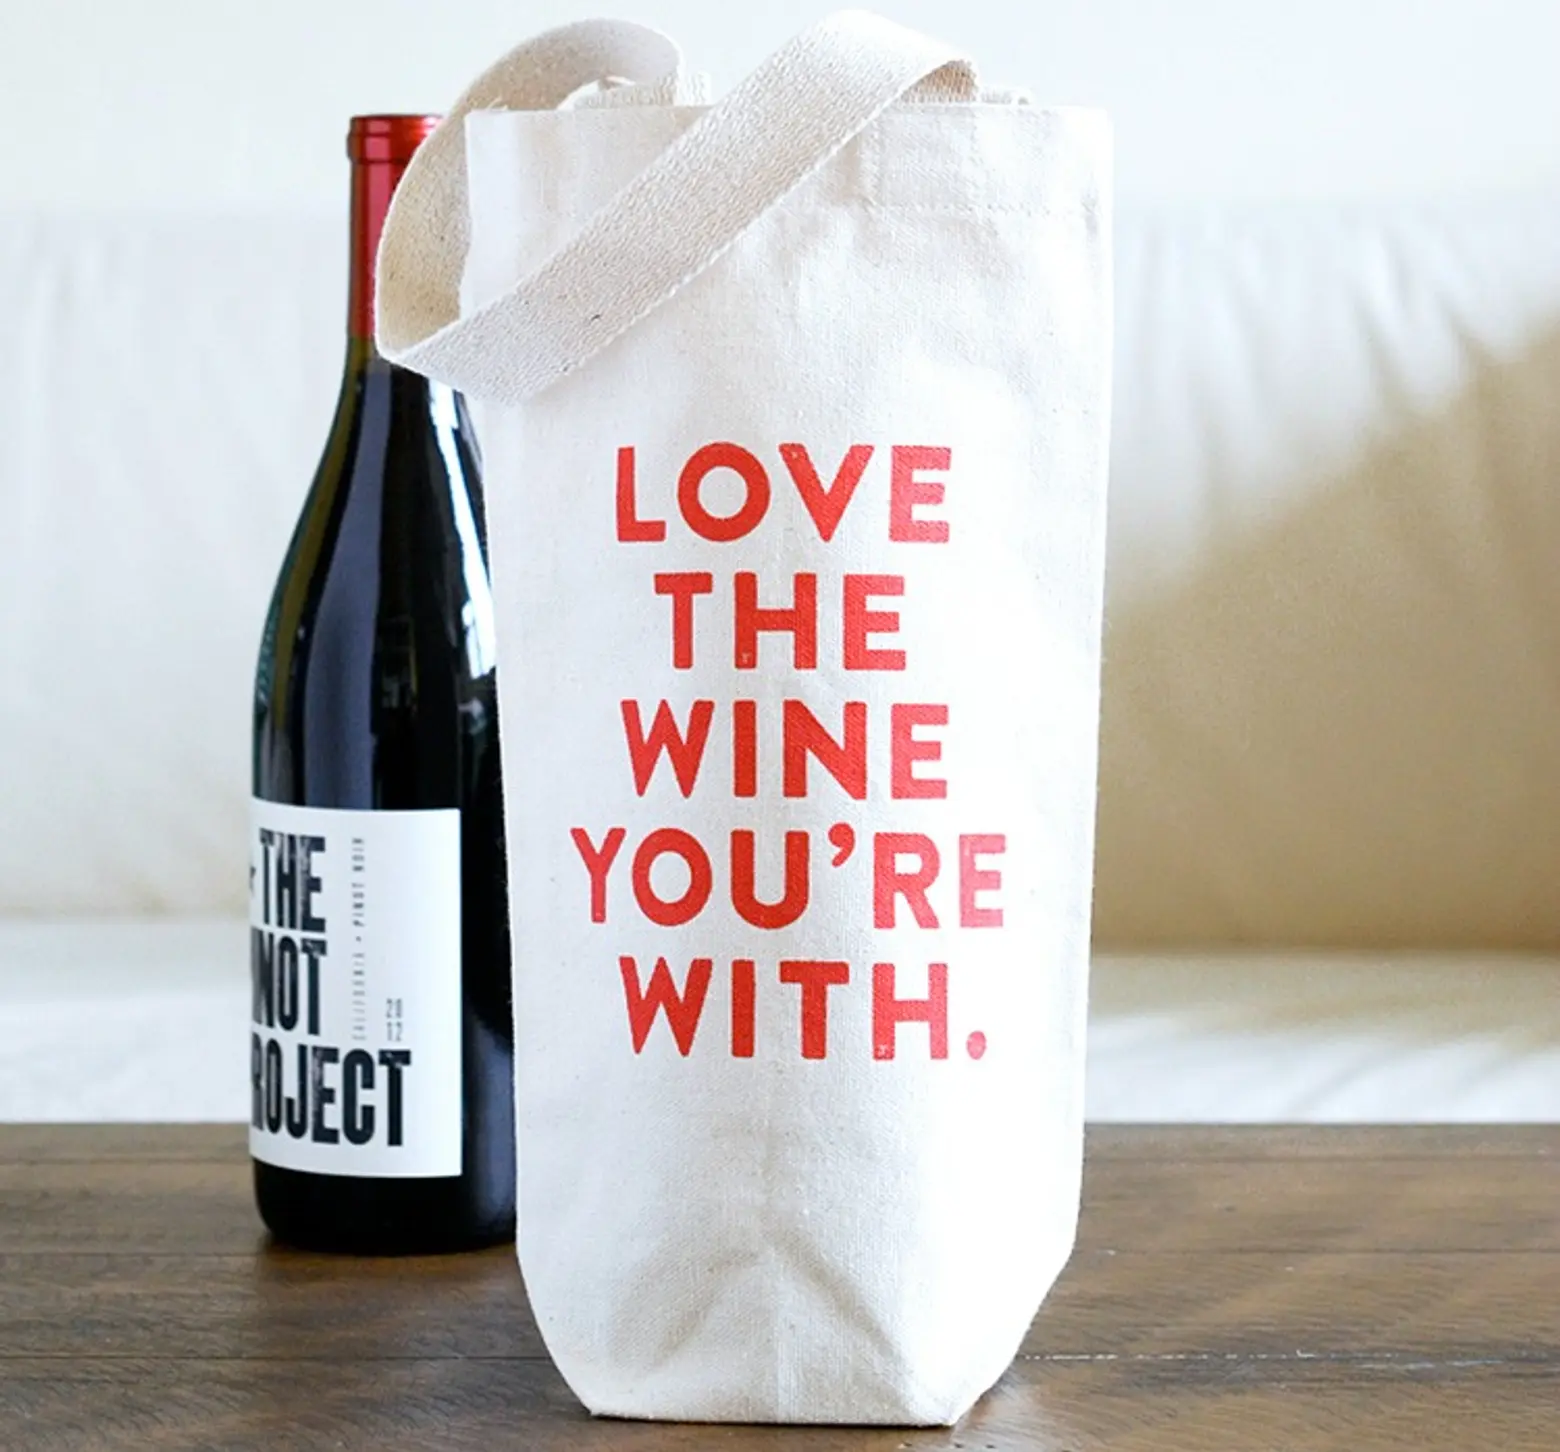 Love The Wine You're With wine tote, Diana Kuan, Plate & Pencil, wine totes